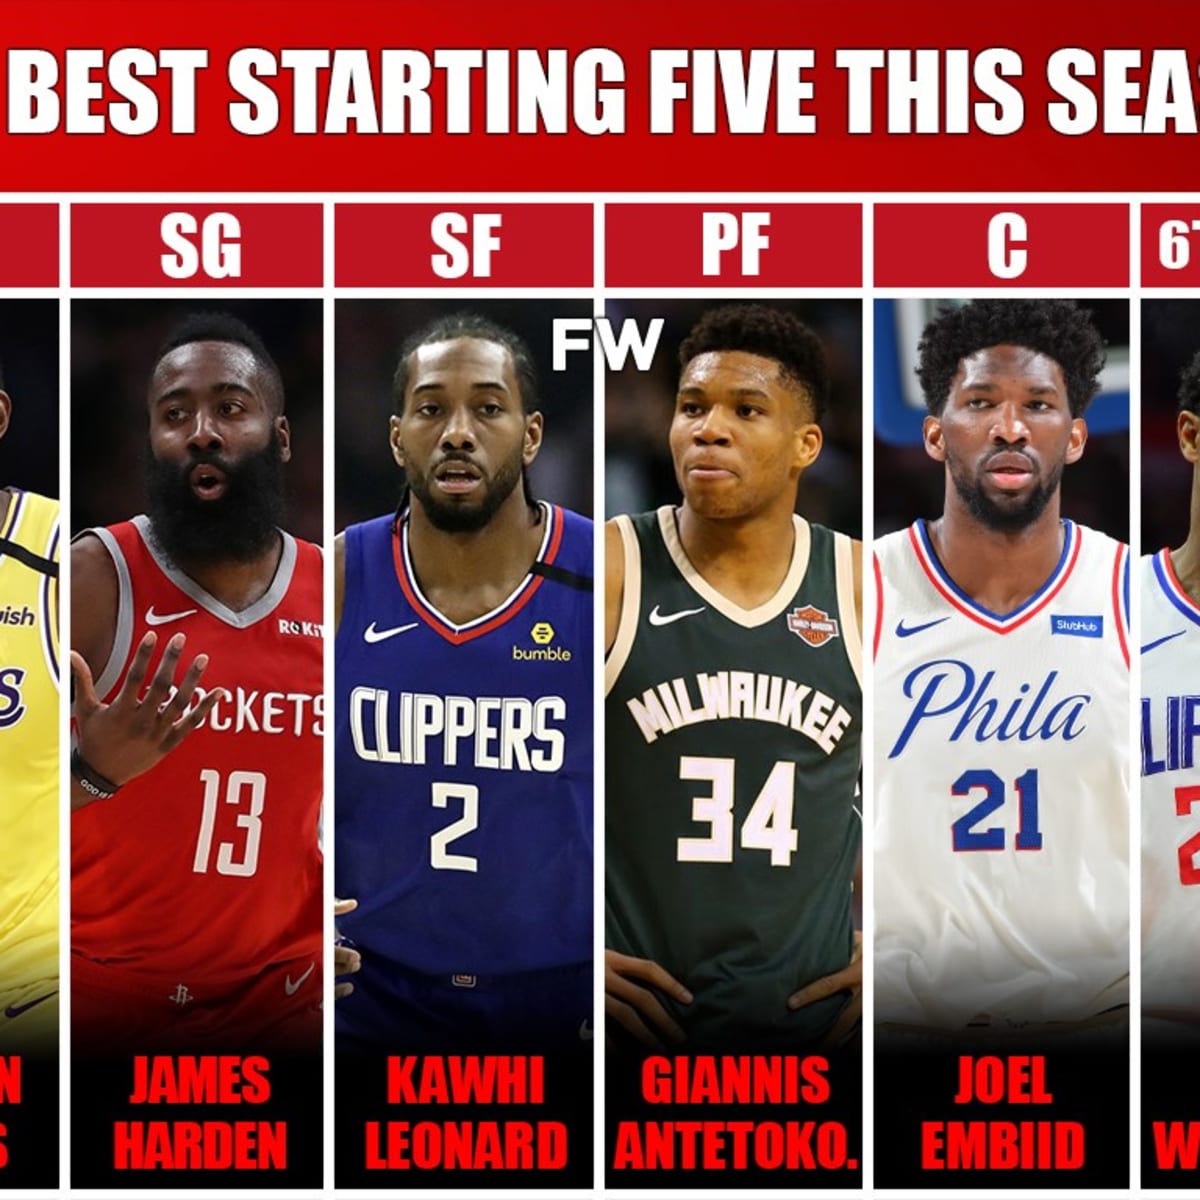 RANKING THE BEST STARTING 5 FROM EACH NBA TEAM 